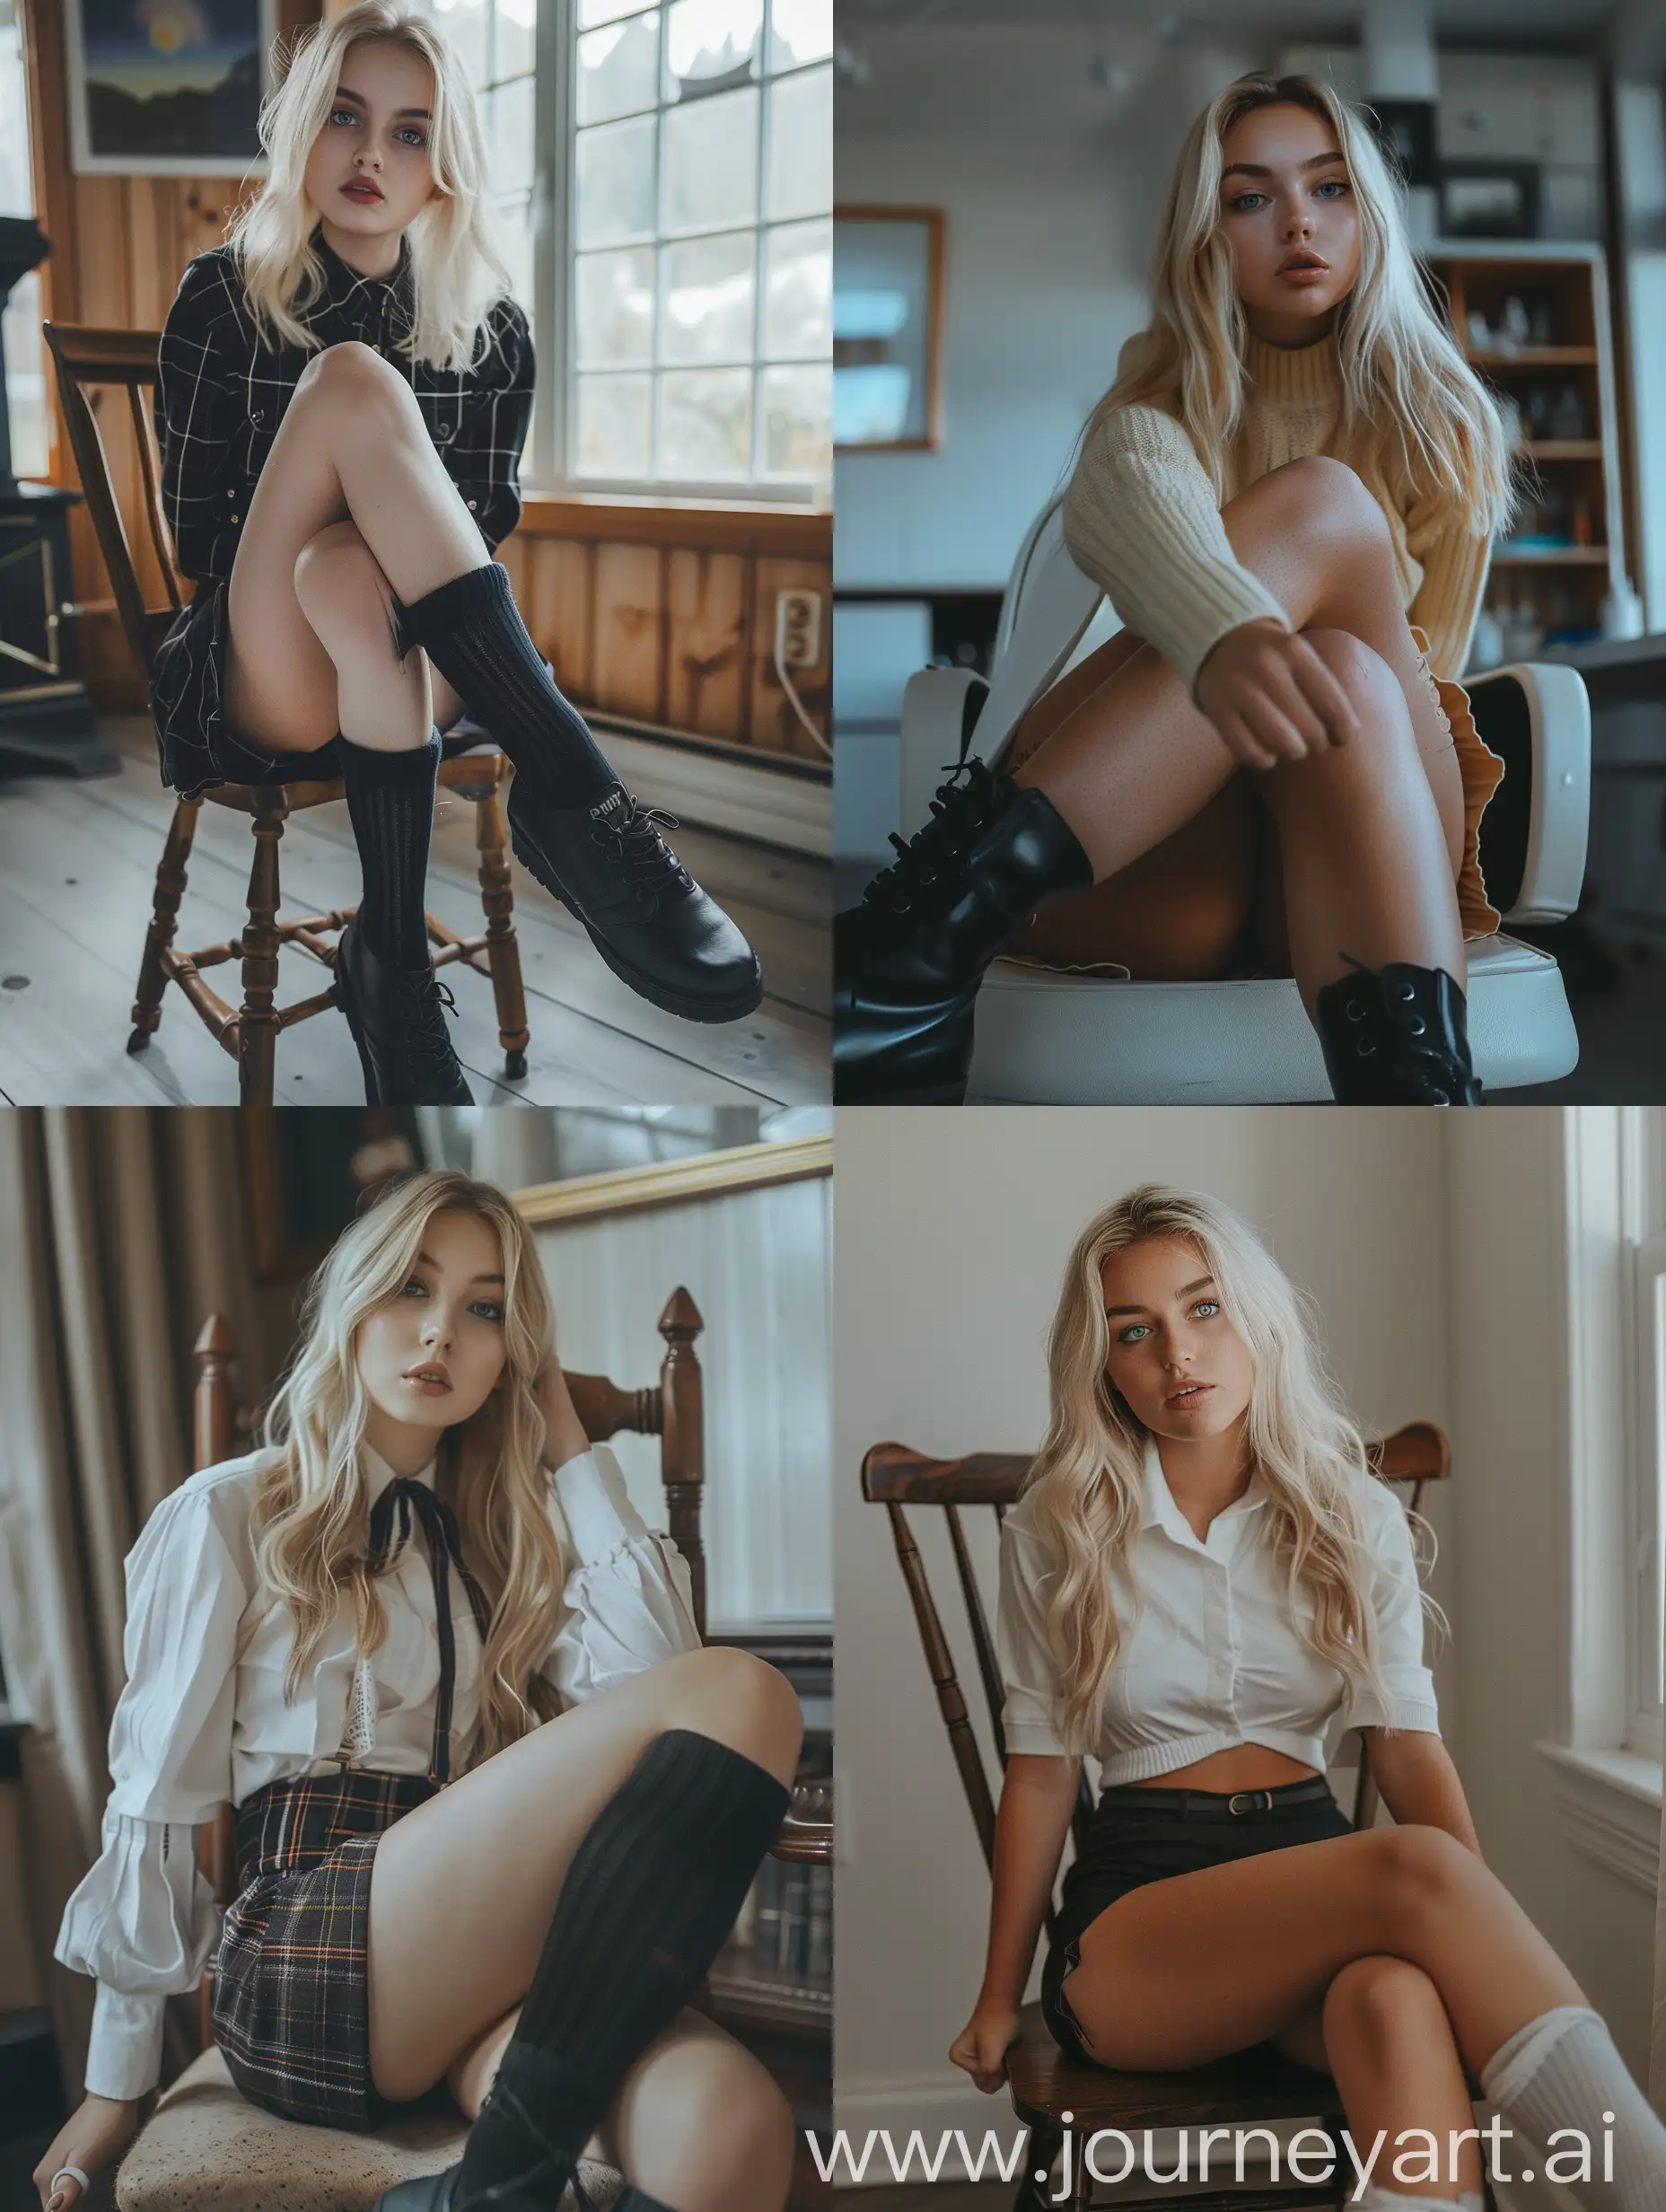 a blonde young woman, 20 years old, influencer, beauty, school uniform,  , makeup,, ,, black boots, ,sitting on chair, ,fat legs, , socks and boots, 4k, sitting on chair,  blue eye,
, , , close up, front view, no filters, no effects, natural, 